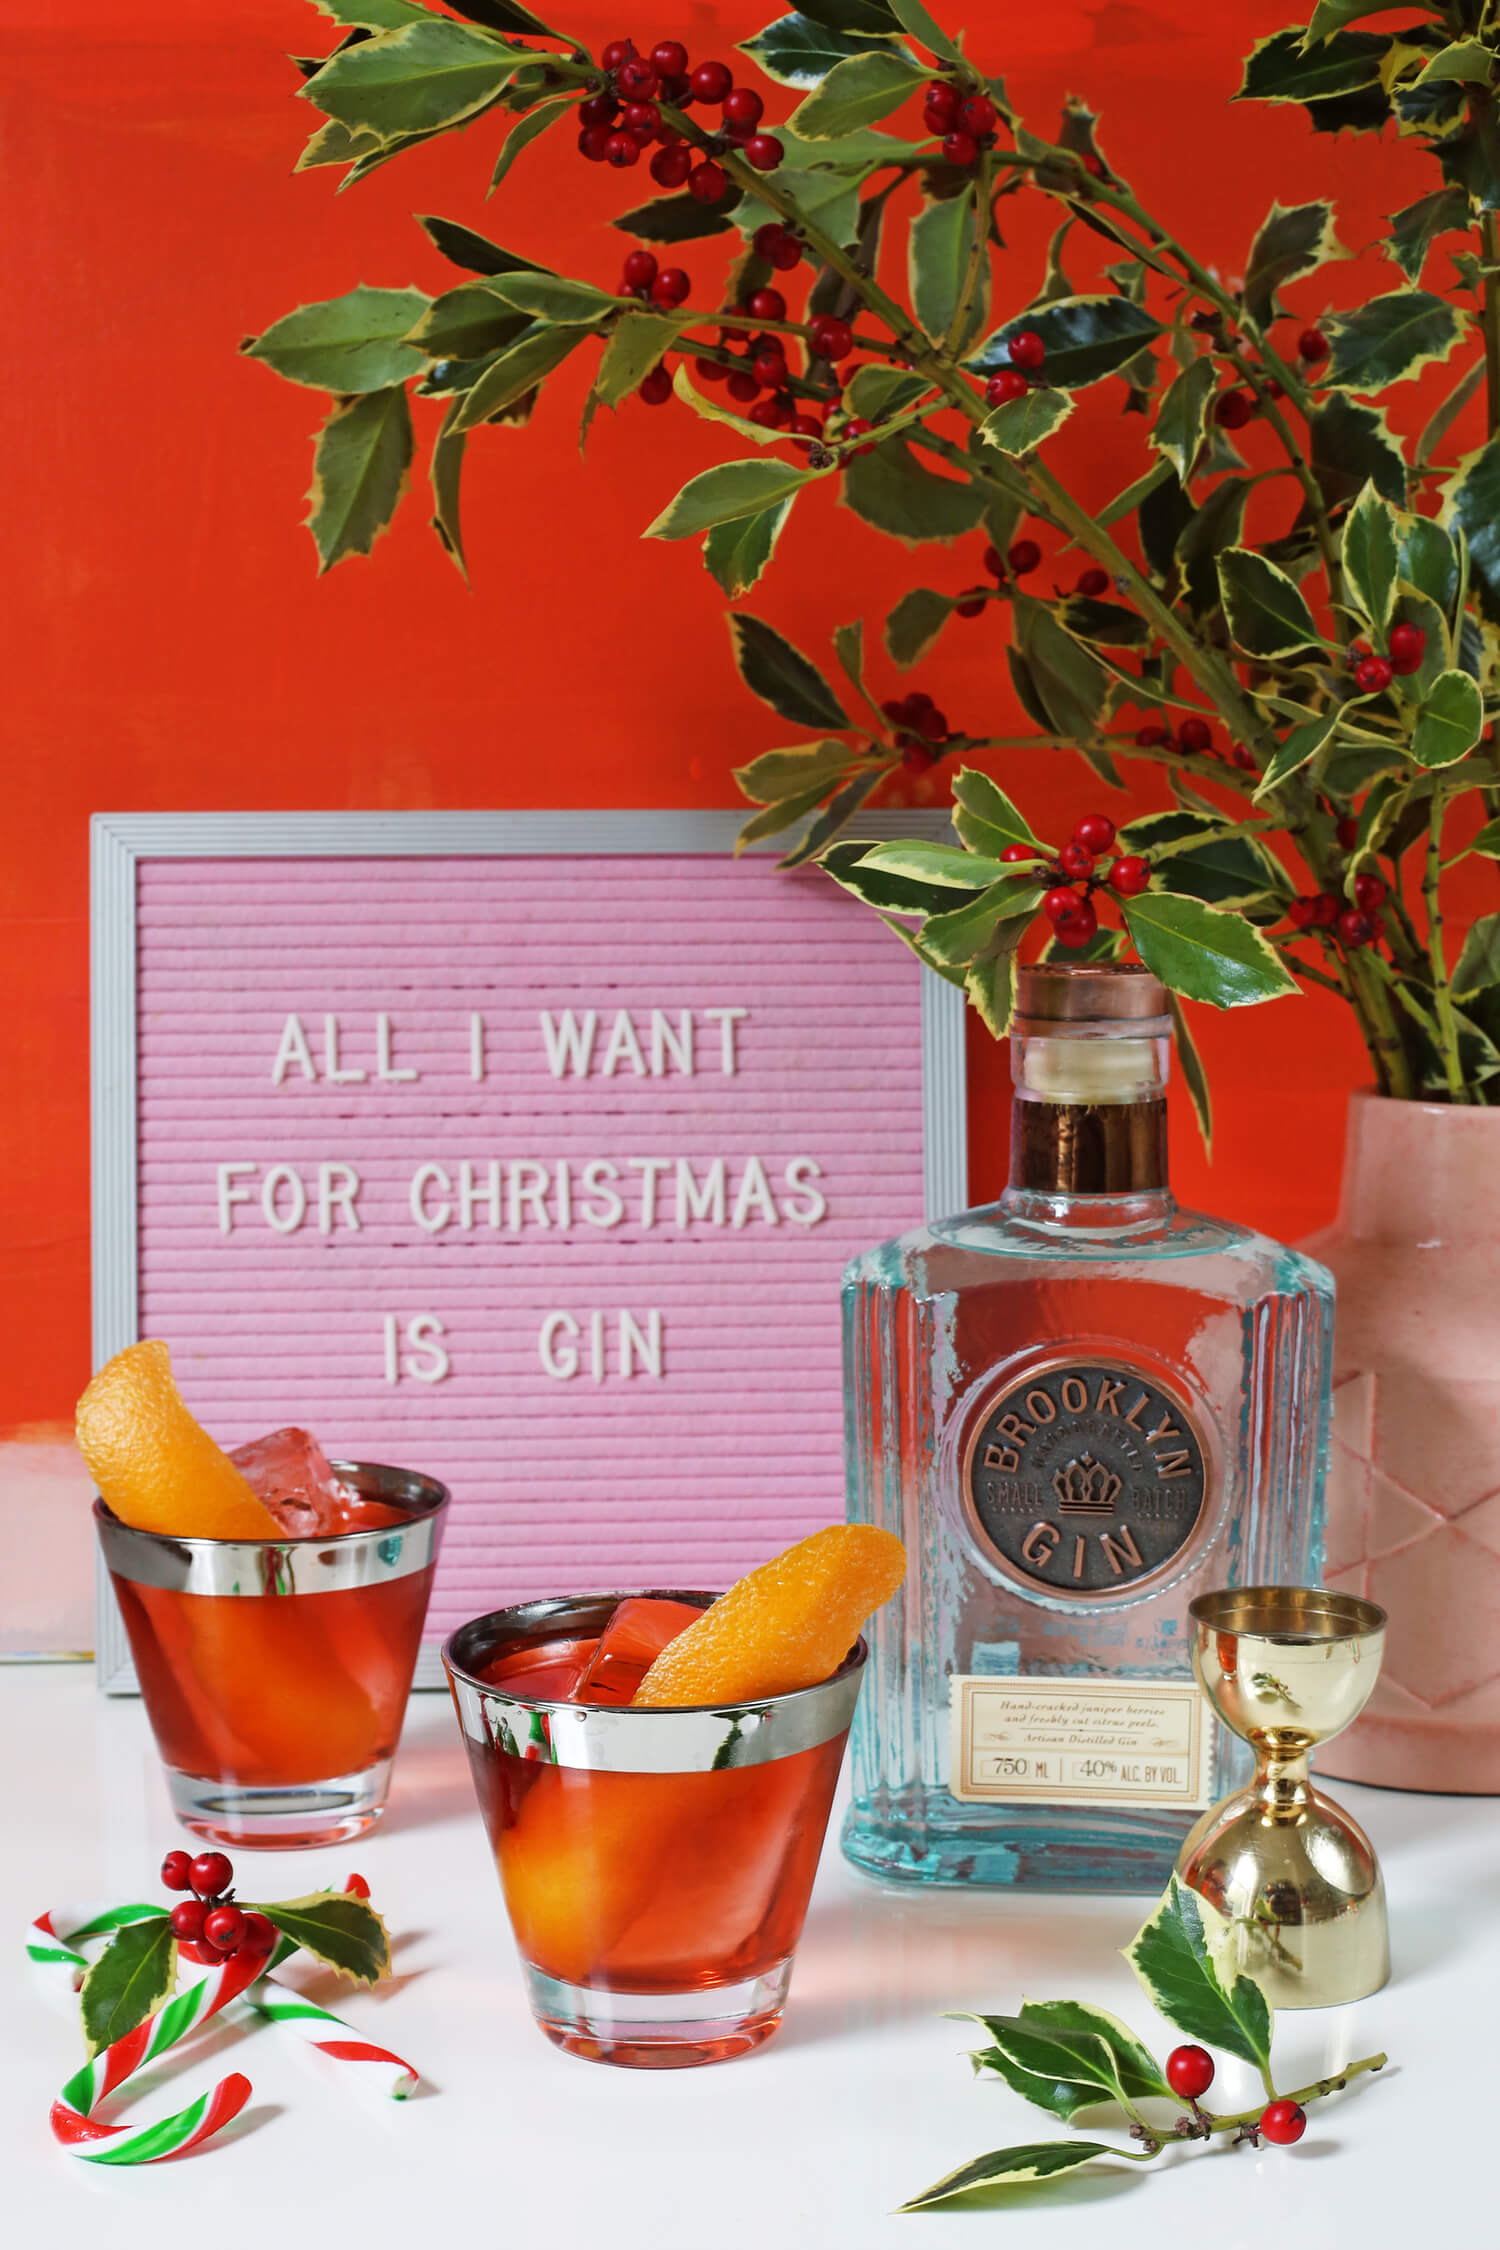 All I Want For Christmas is Gin: Peppermint Negroni 